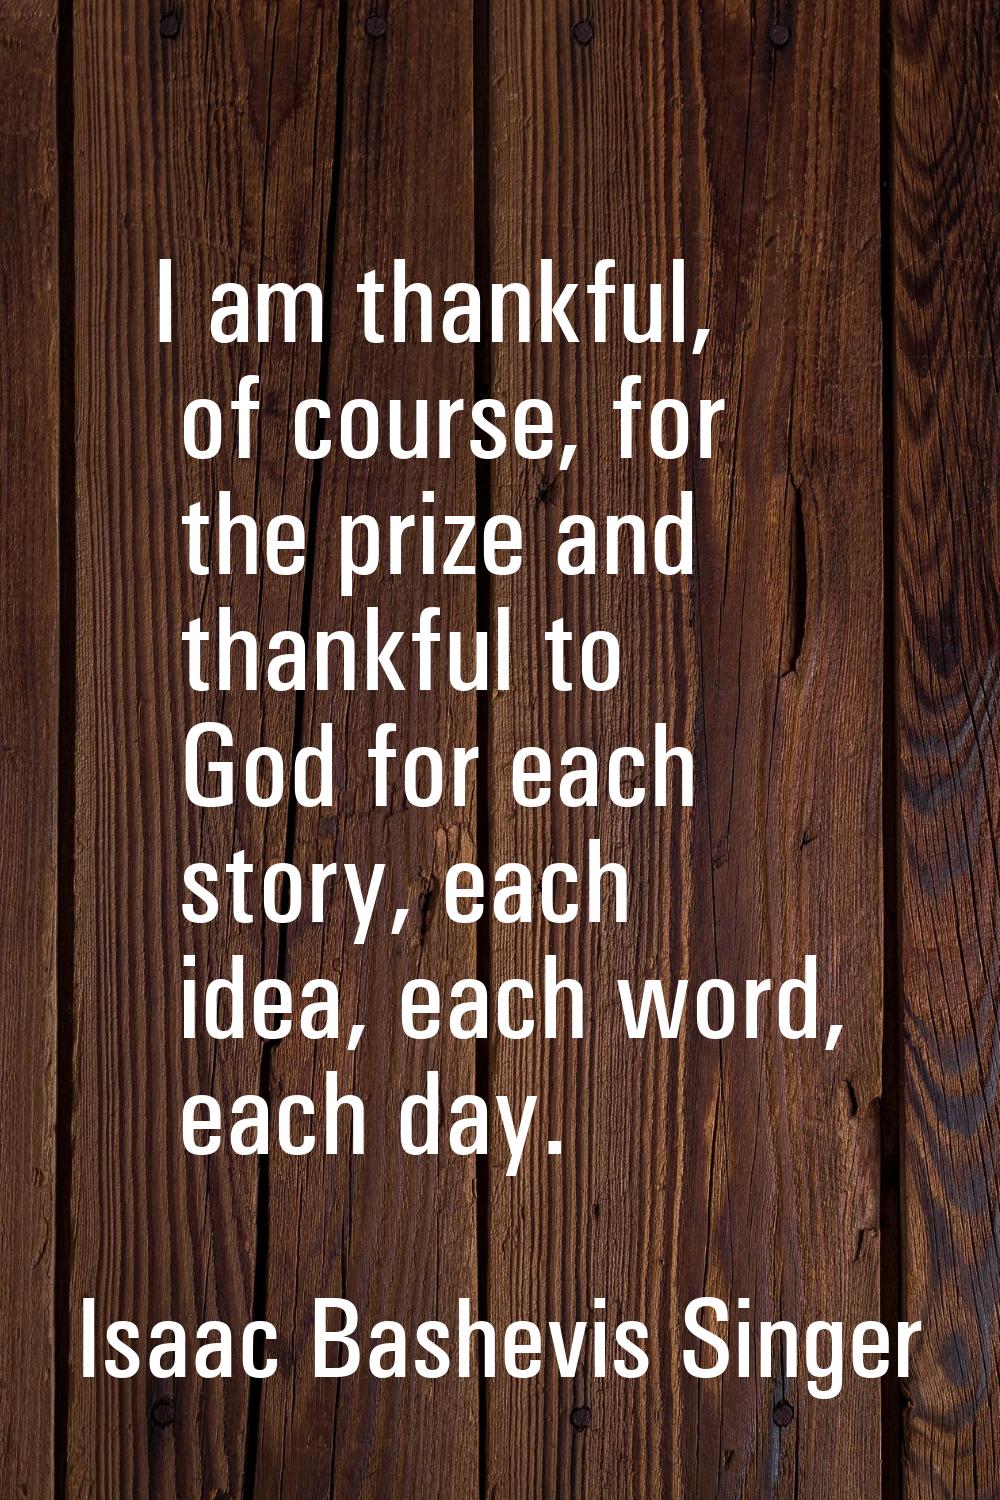 I am thankful, of course, for the prize and thankful to God for each story, each idea, each word, e